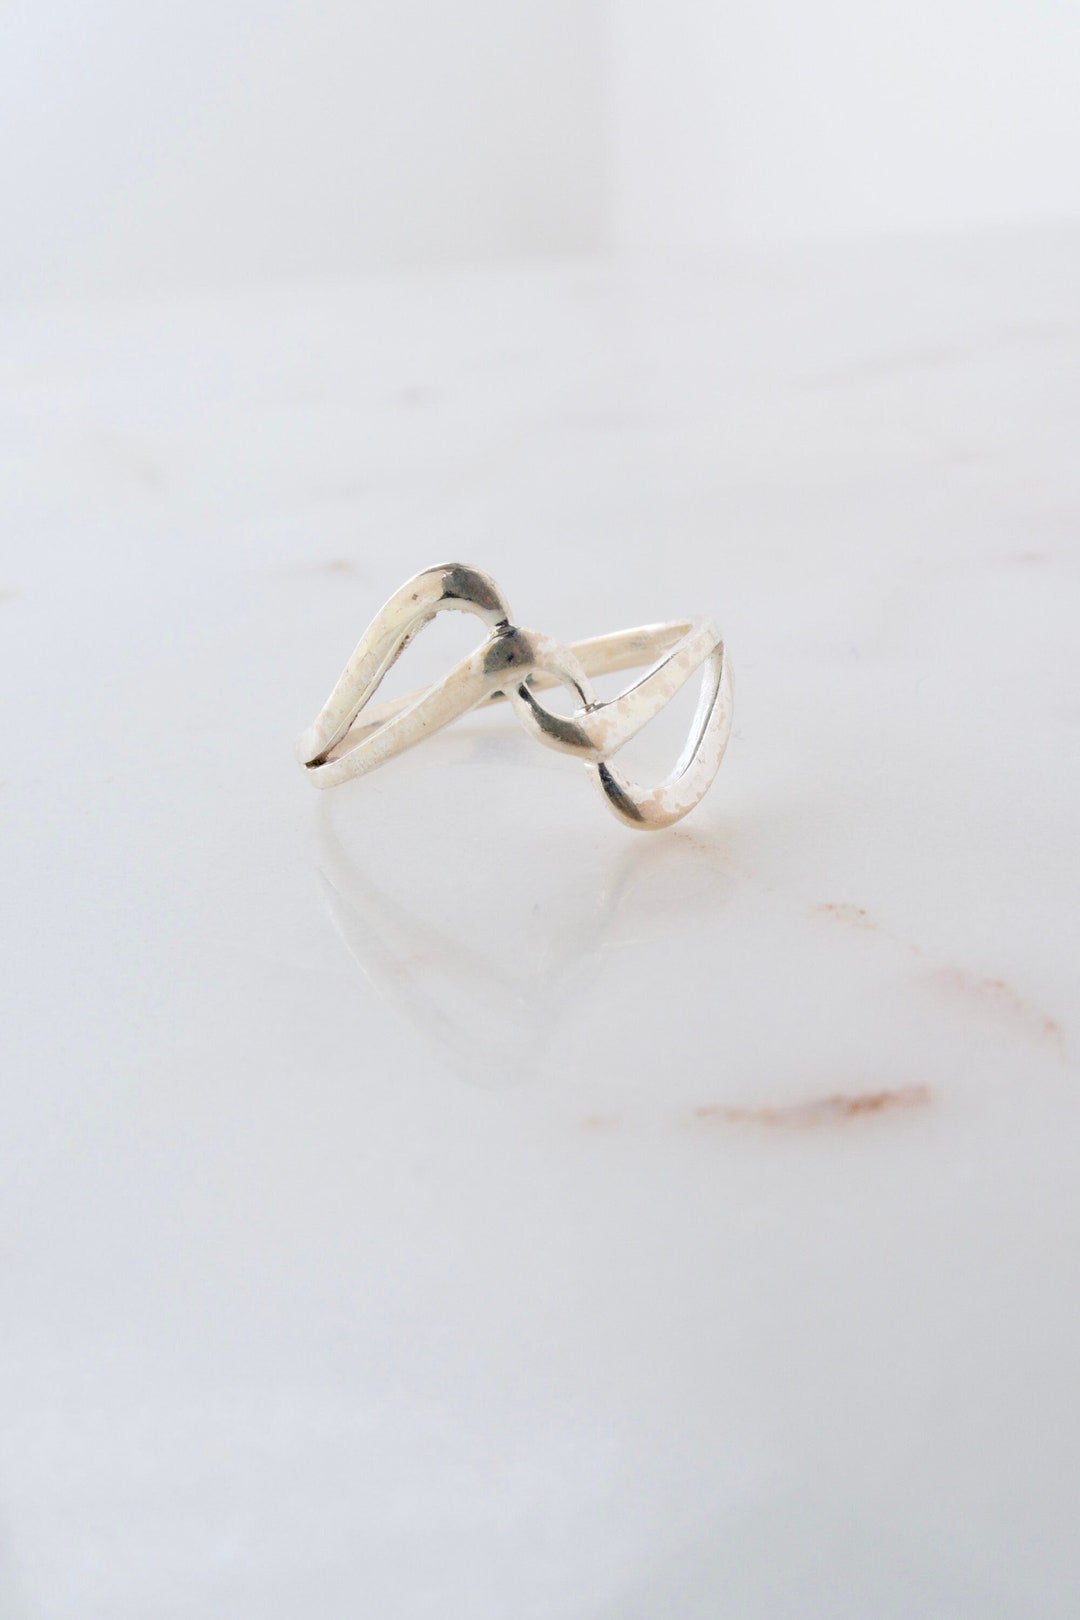 Vintage Sterling Silver Wavy Ring Size 9.75 - Etsy